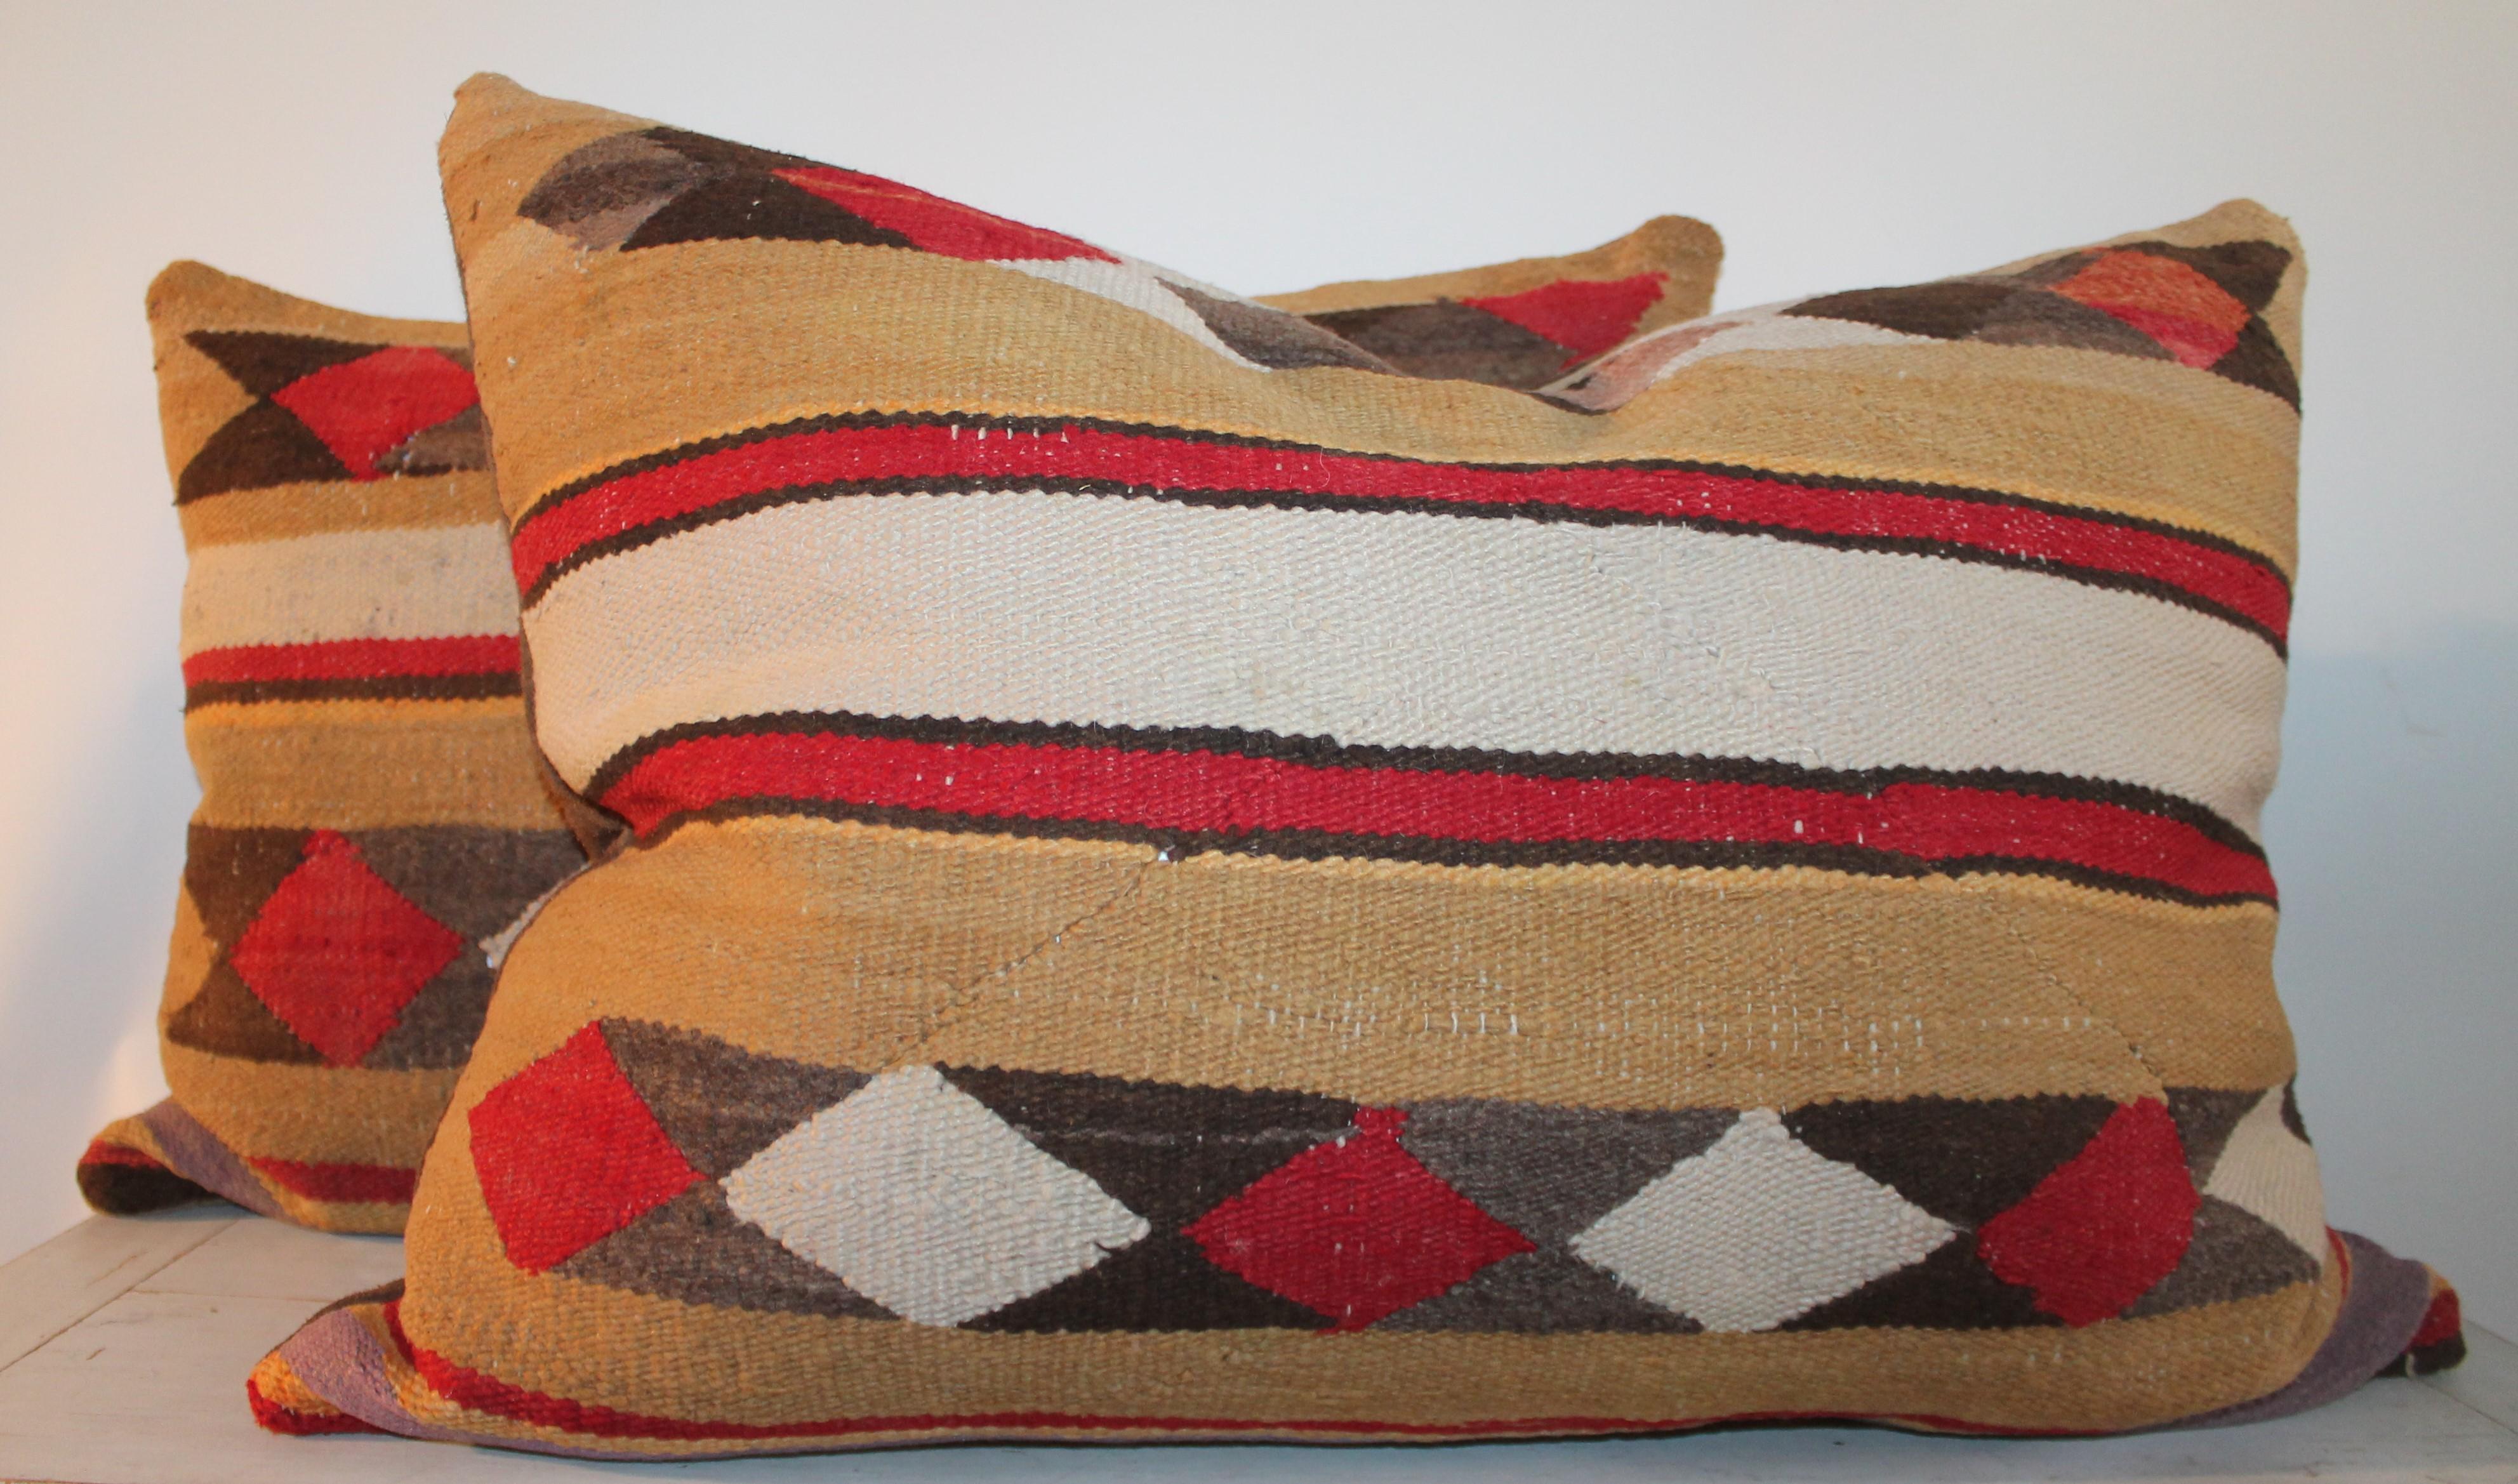 Adirondack Navajo Indian Weaving Pillows with Leather Backings / Pair